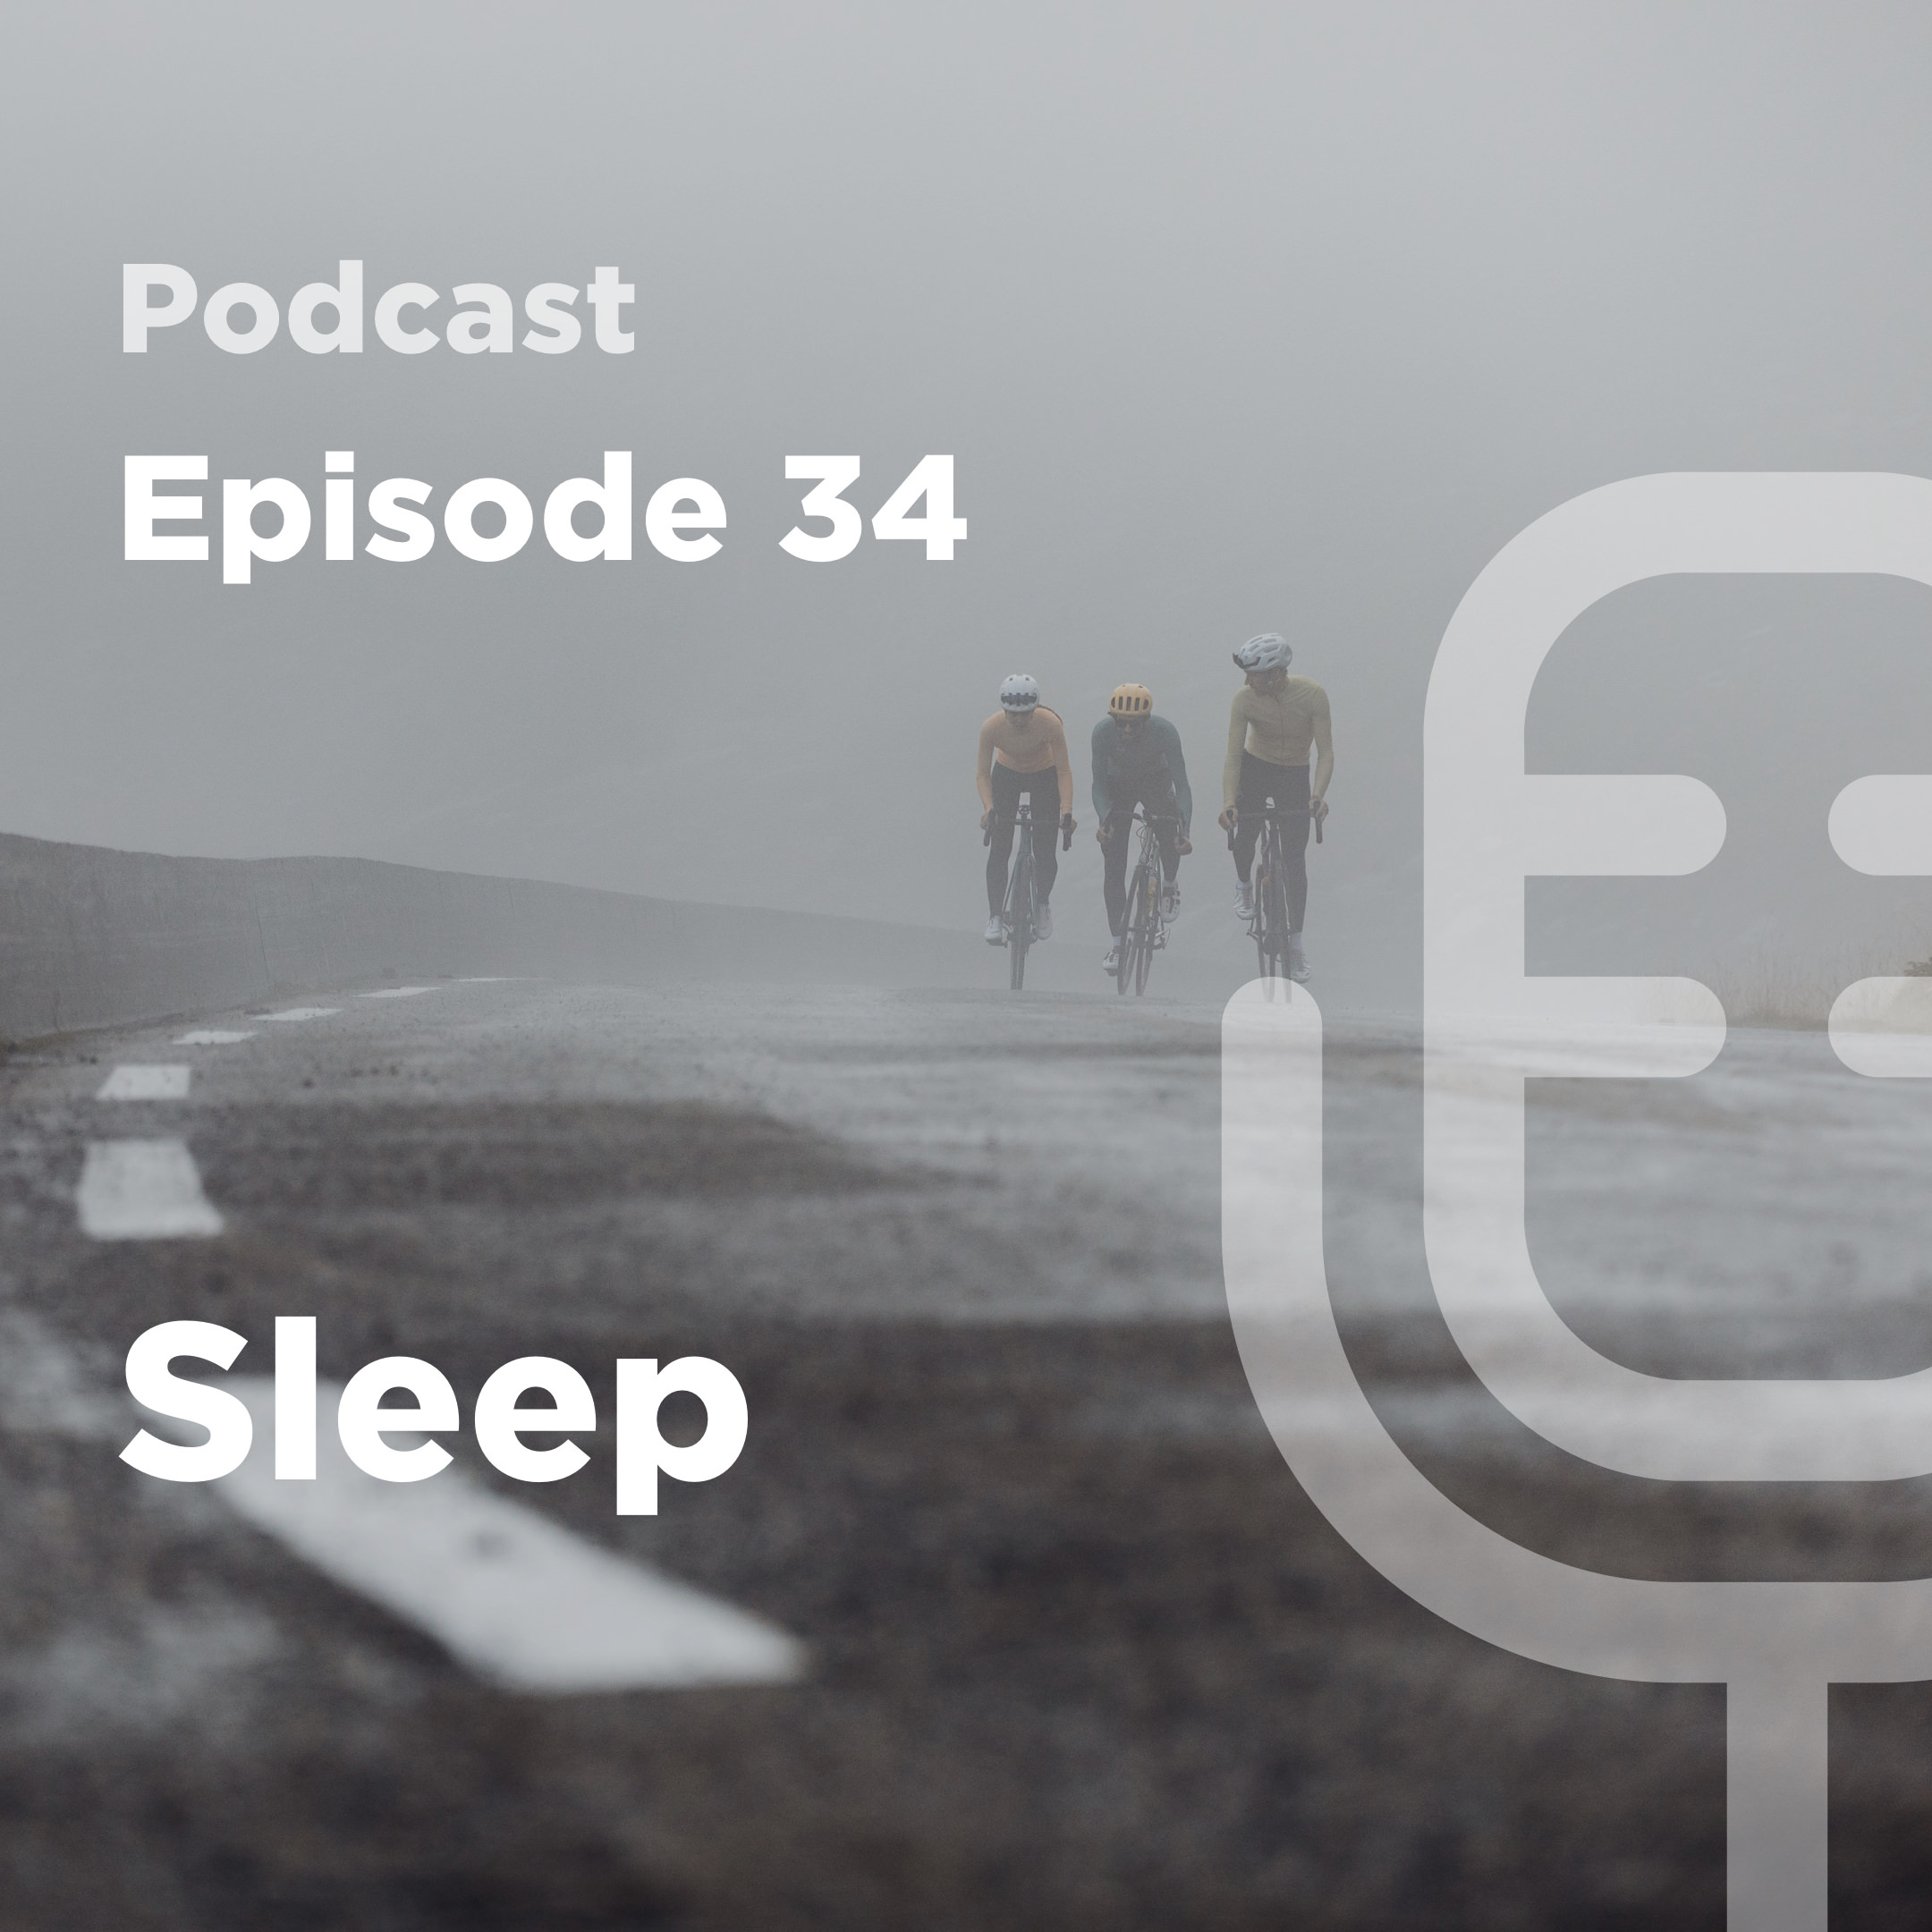 Beter Worden Podcast - Sleep - Join Cycling app